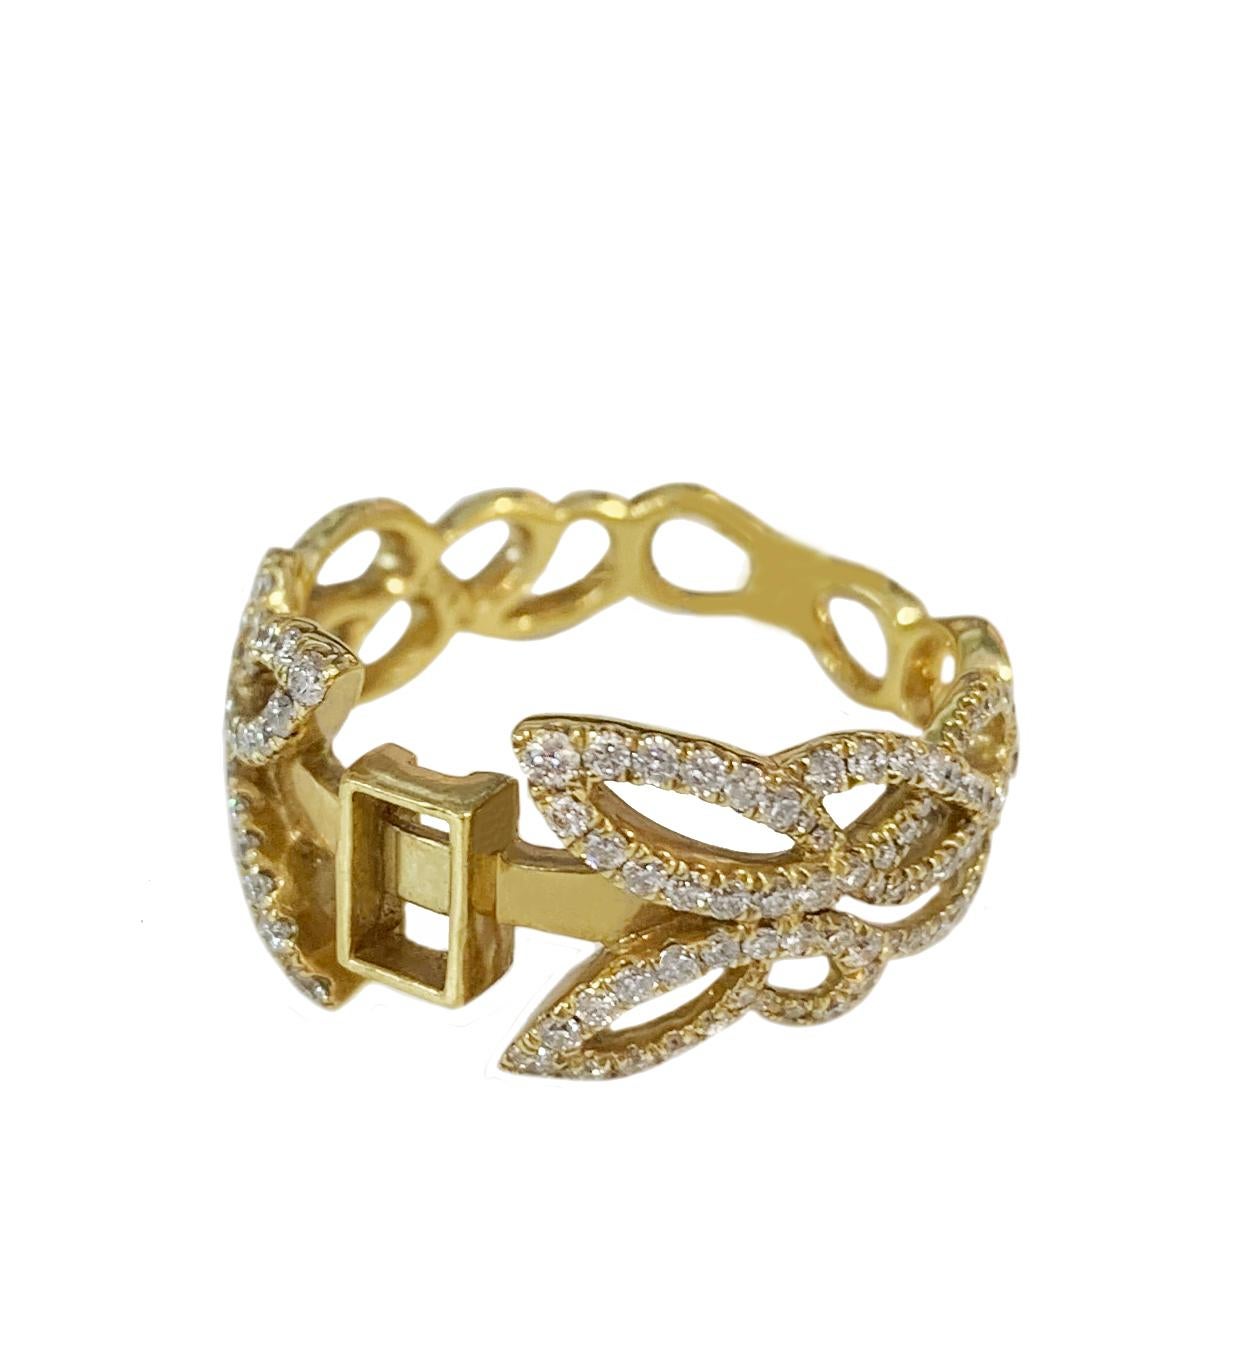 
18k Yellow Gold 
Diamonds:4.69ct
Ring size:7
Weight: 17gr 
Dimension : 1.4x1.8 “
Retail: $19500